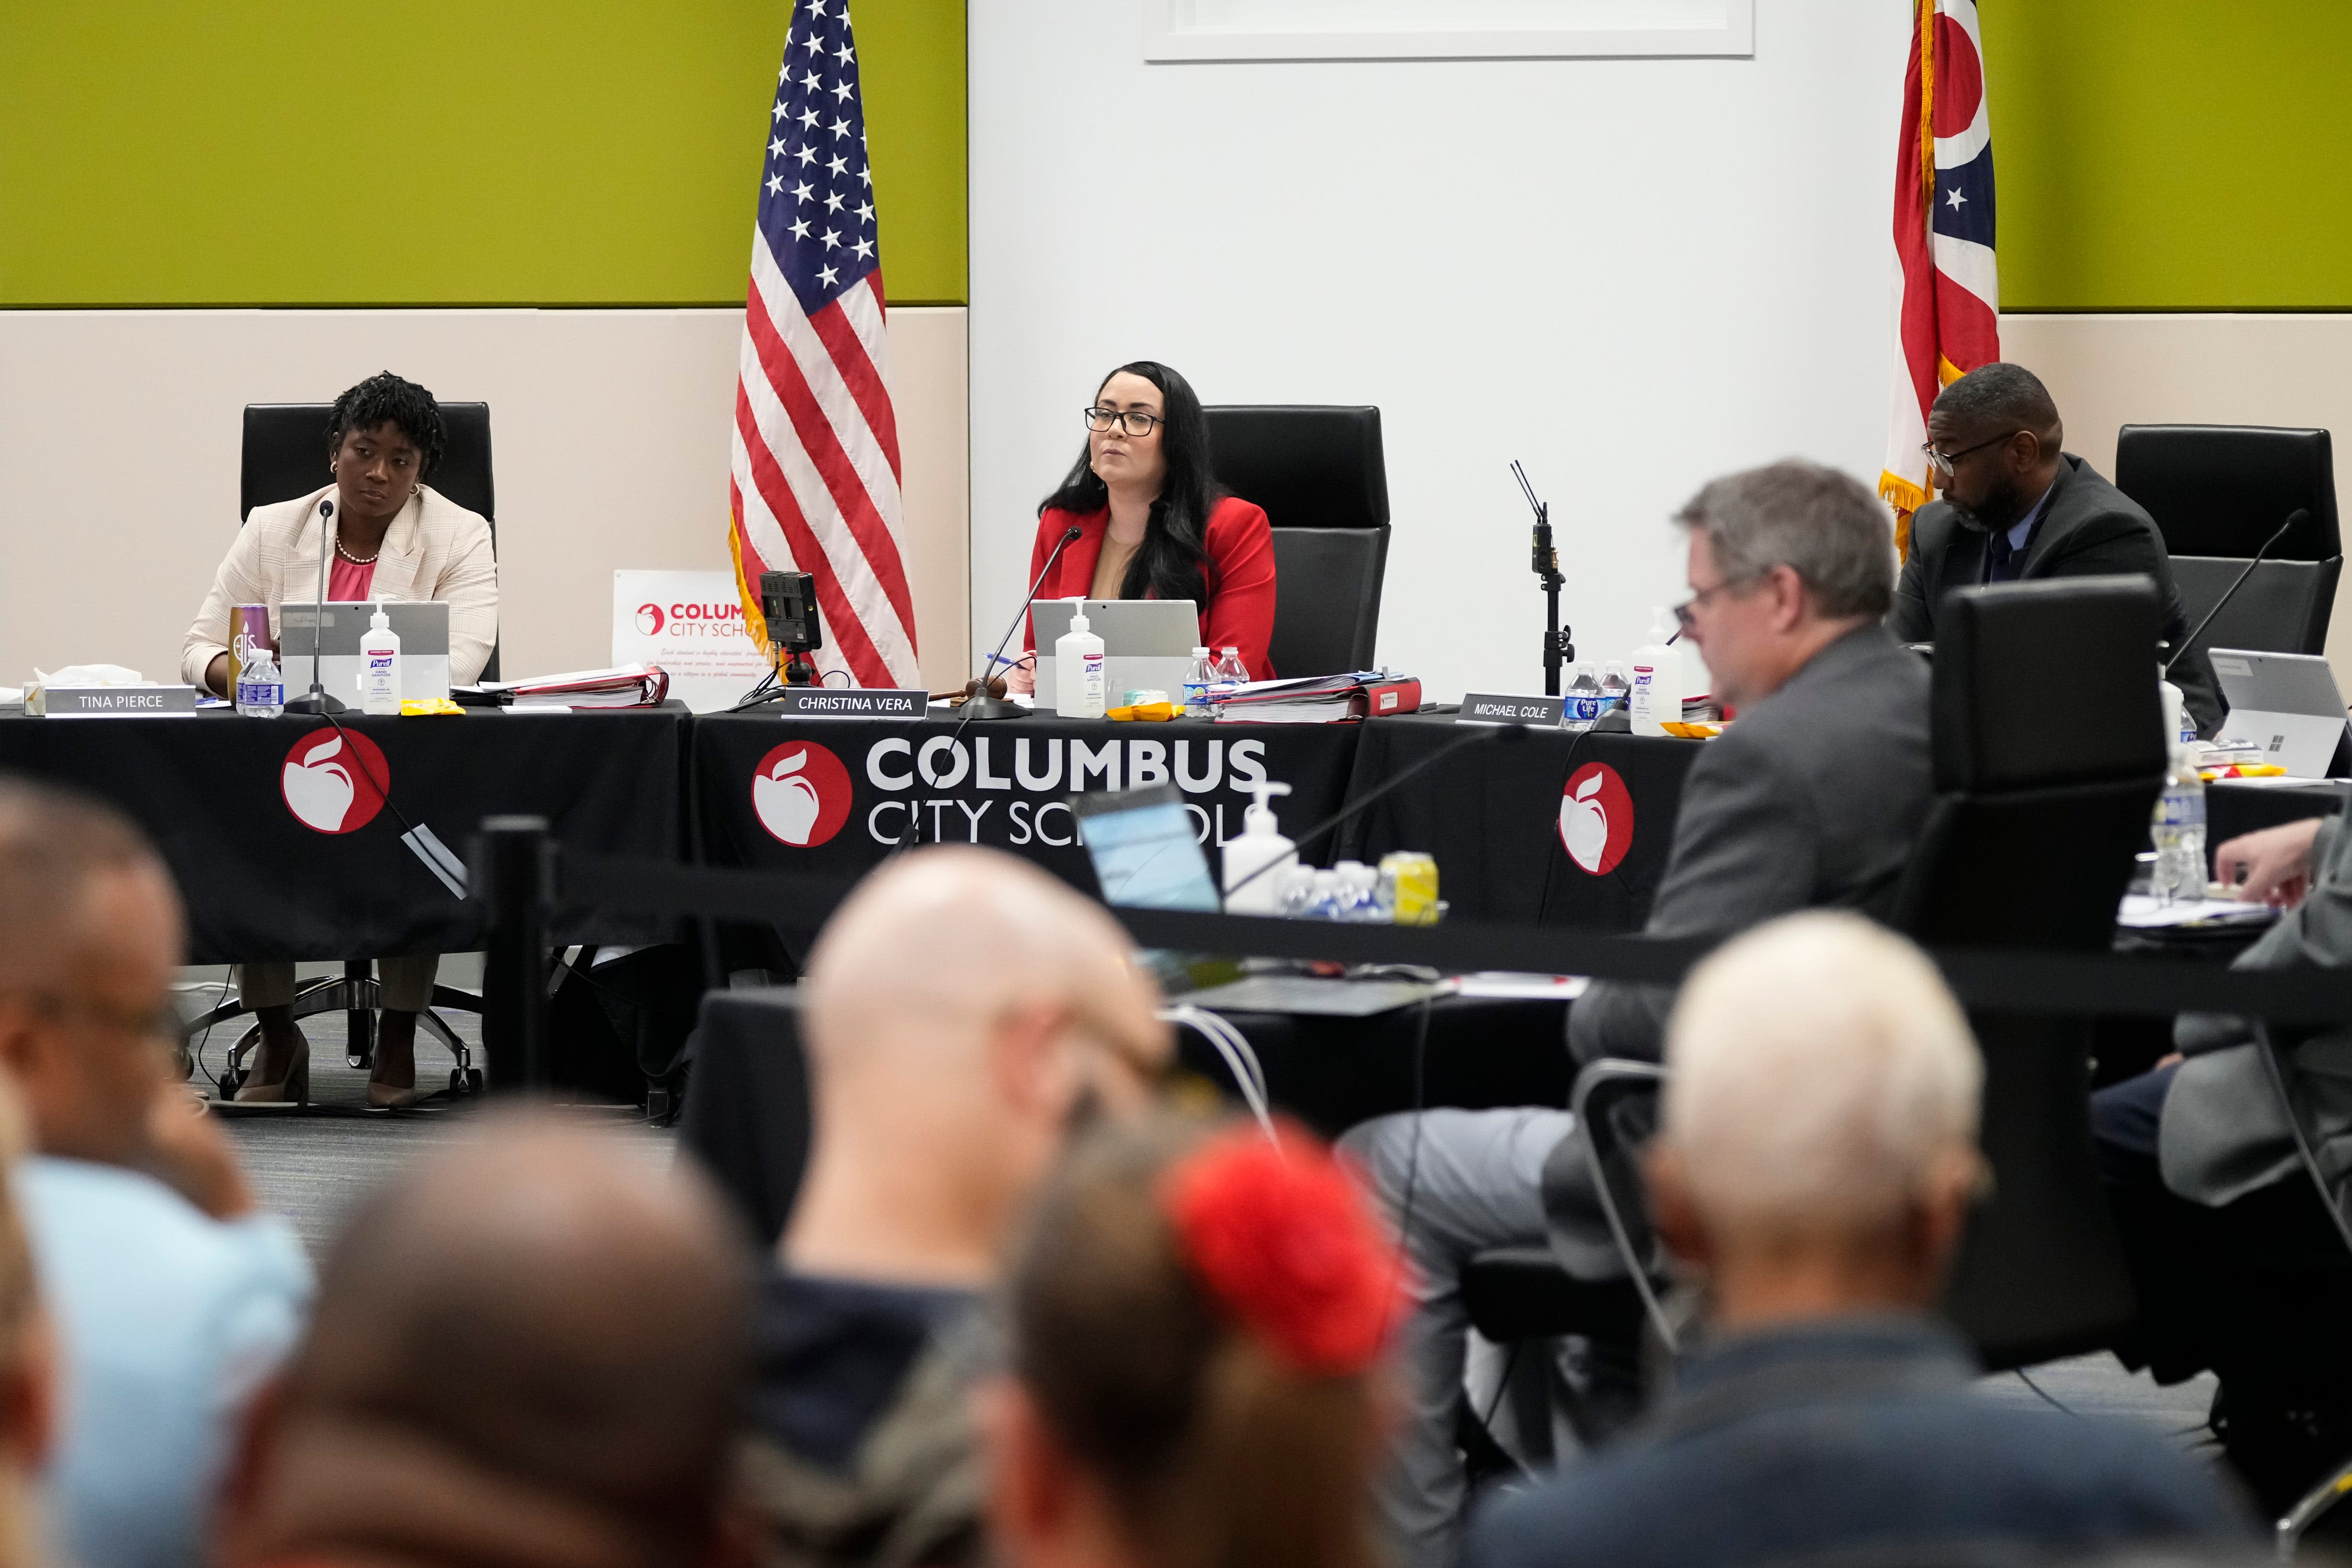 20 Columbus City School buildings could face closure. Here's what to know about the plan